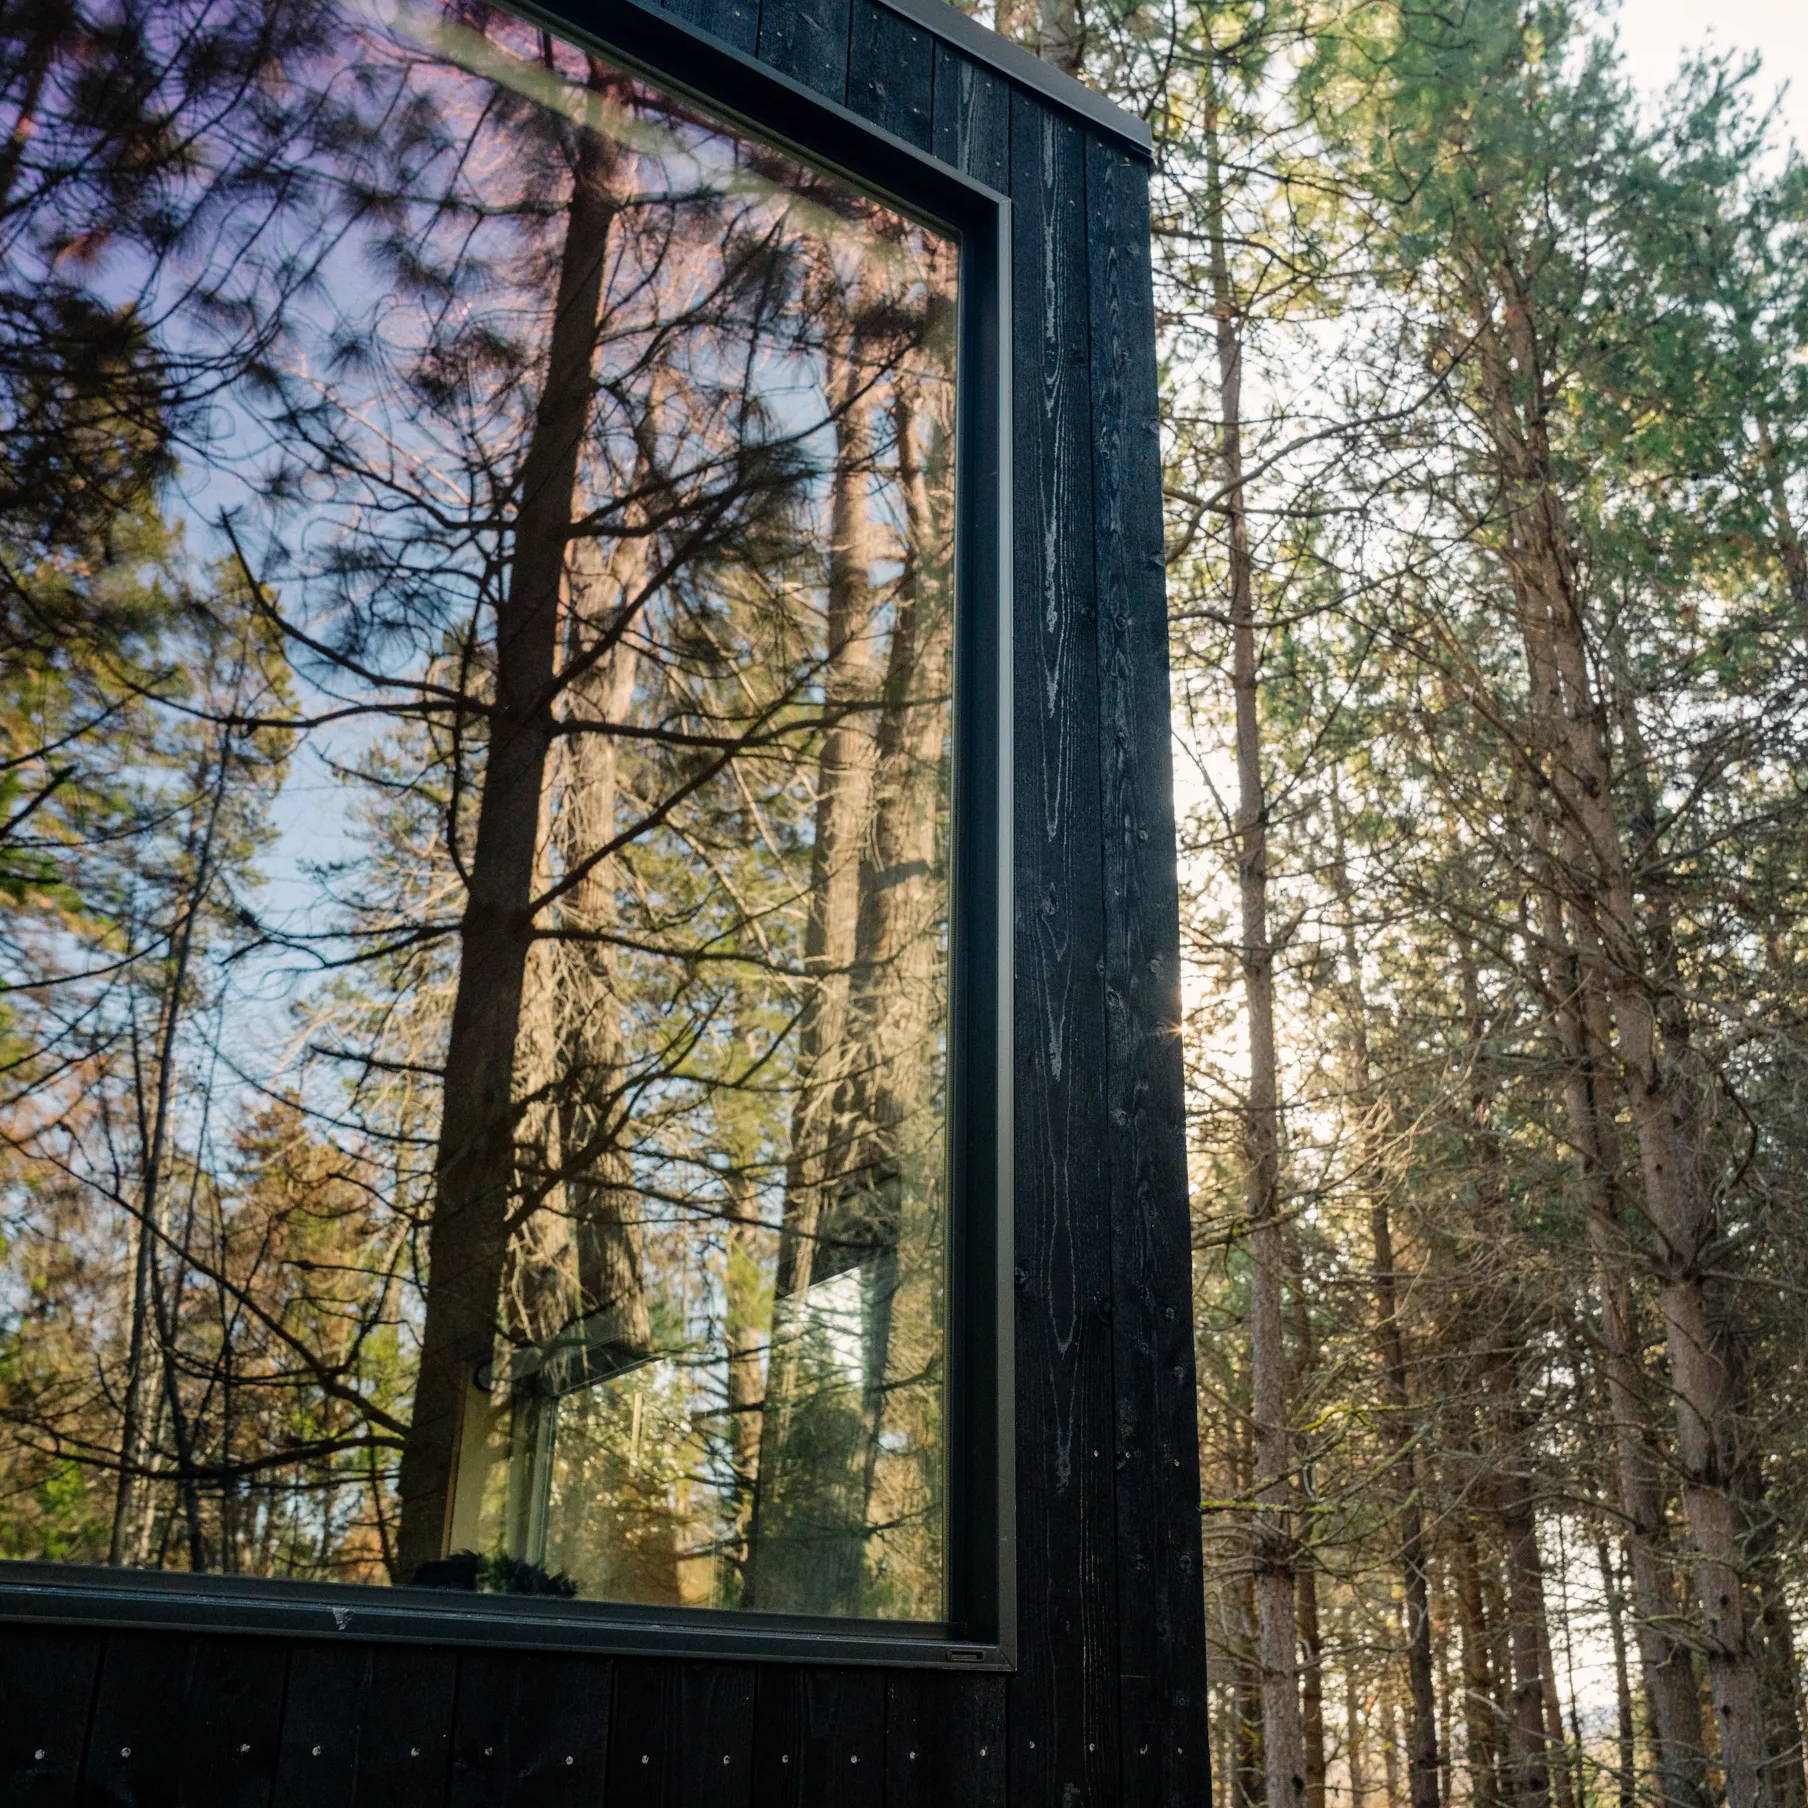 Reflective window of a Getaway House in nature